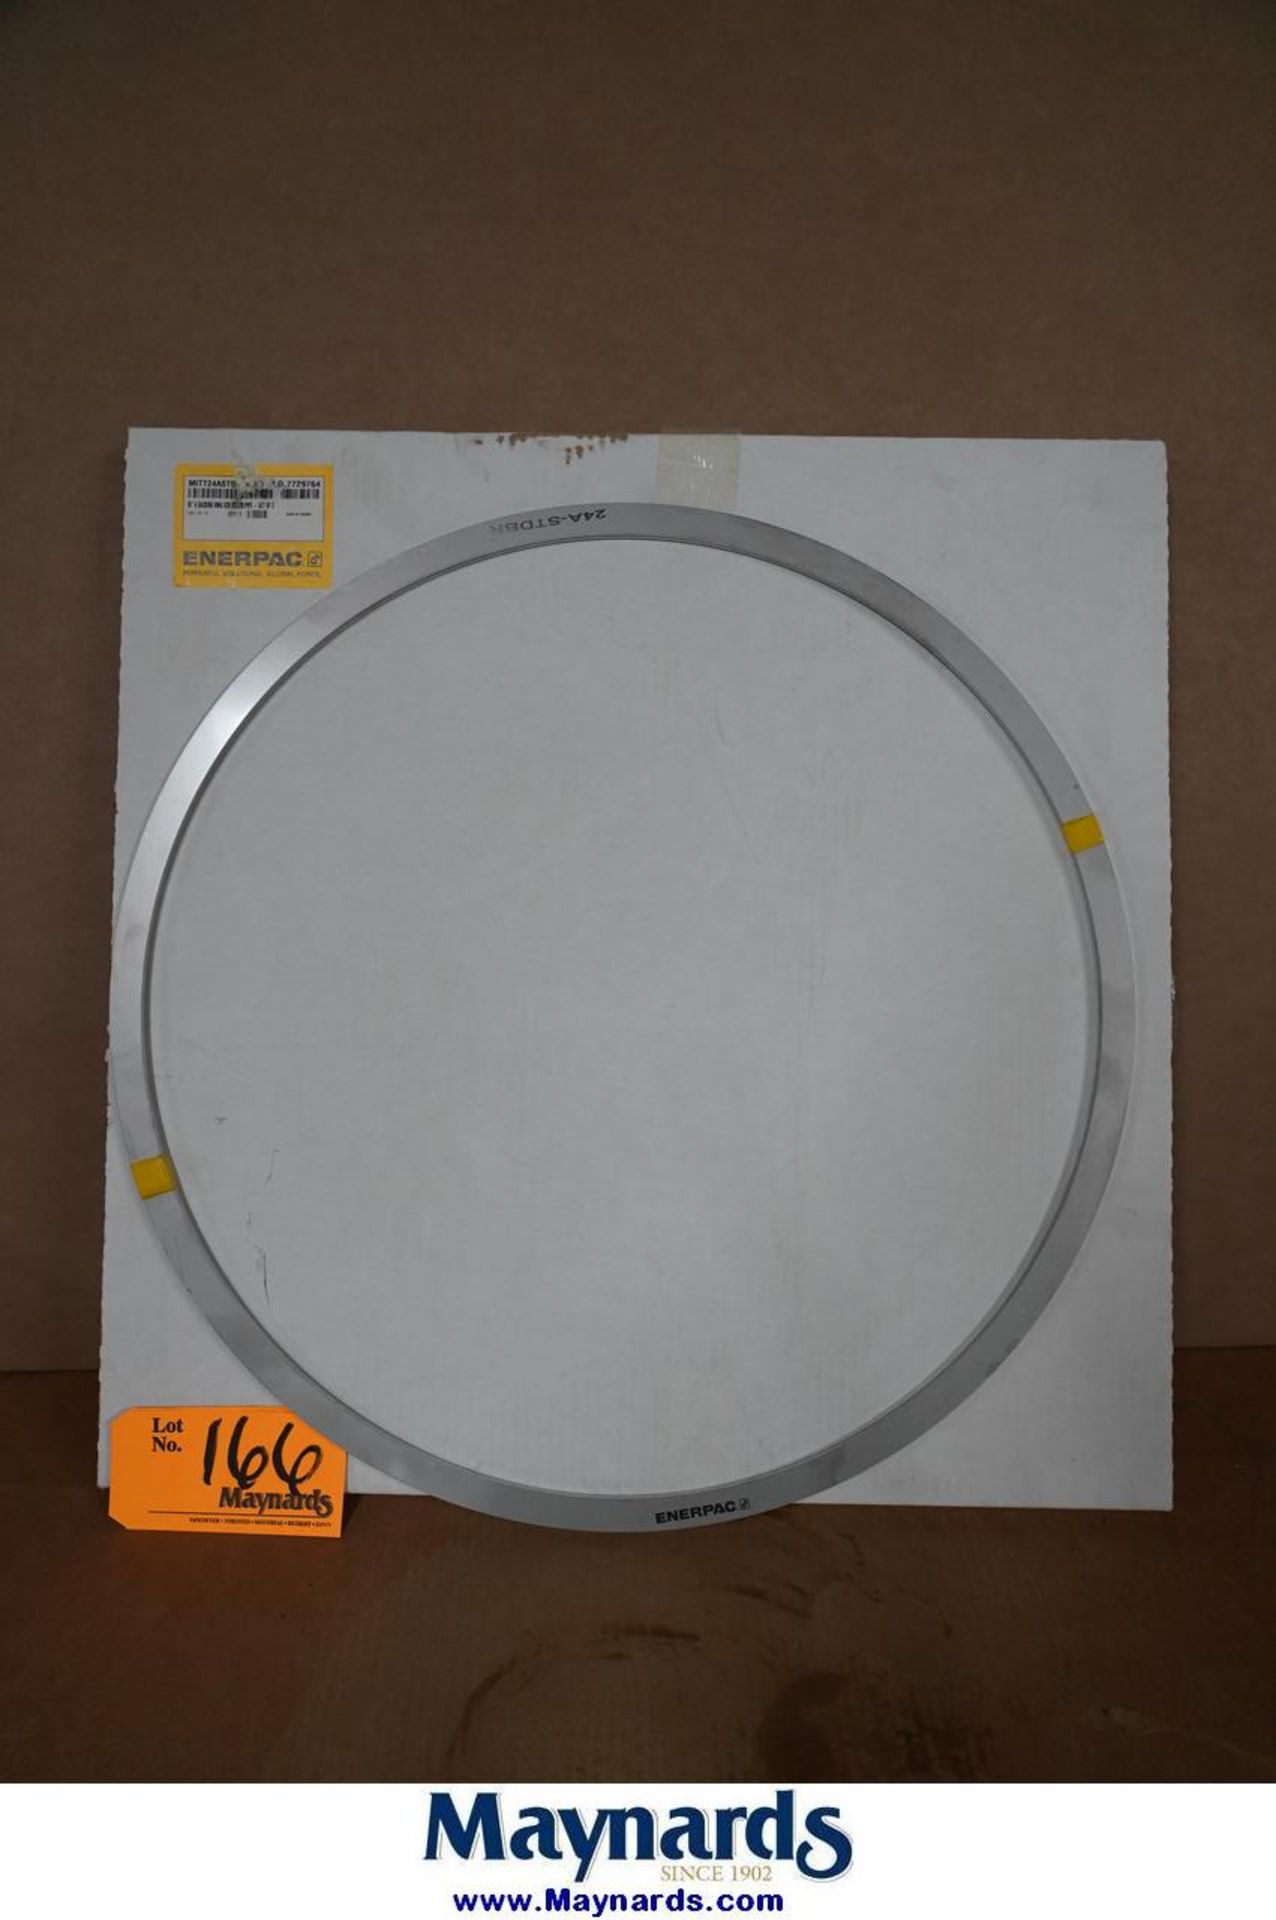 Enerpac MITT 24A STD 24" A Backing Ring SCH STD/20 Pipe